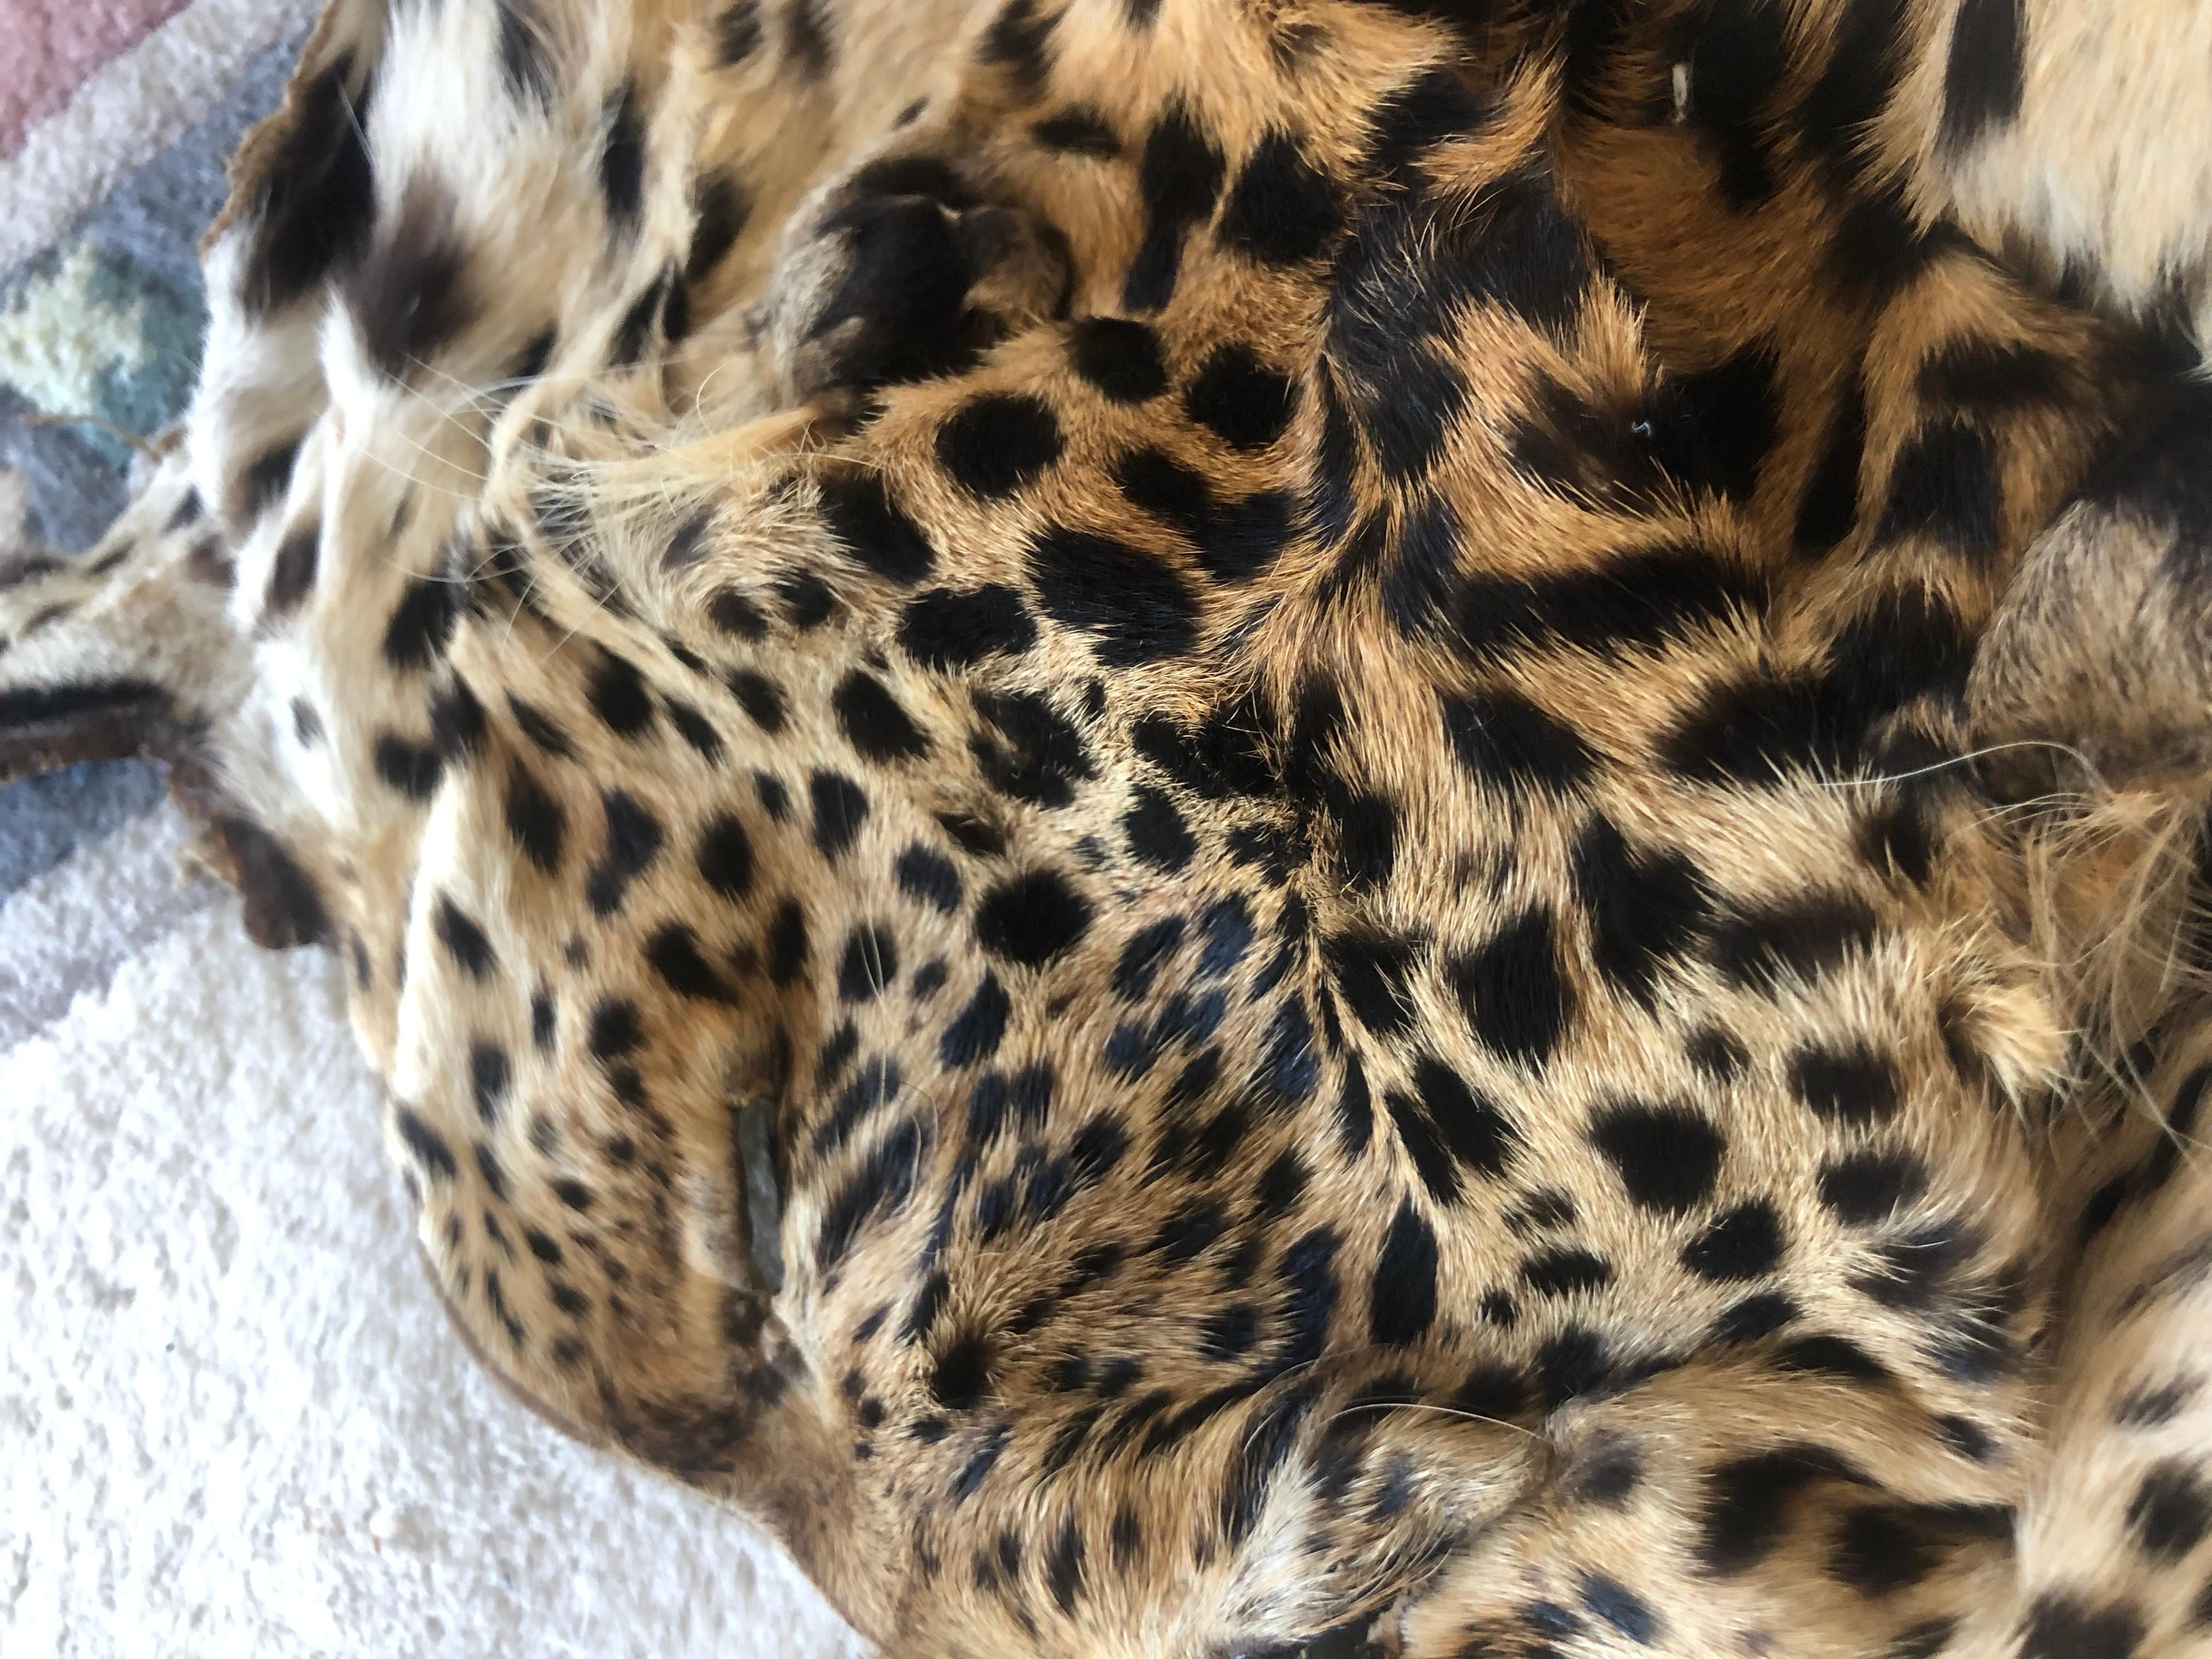 Pieces of real leopard fur
This is for arts and crafts and projects or as a decoration as is the skins are very supple and malleable soft and fresh 
Hairs are not falling
Great piece for curiosity or to make a project